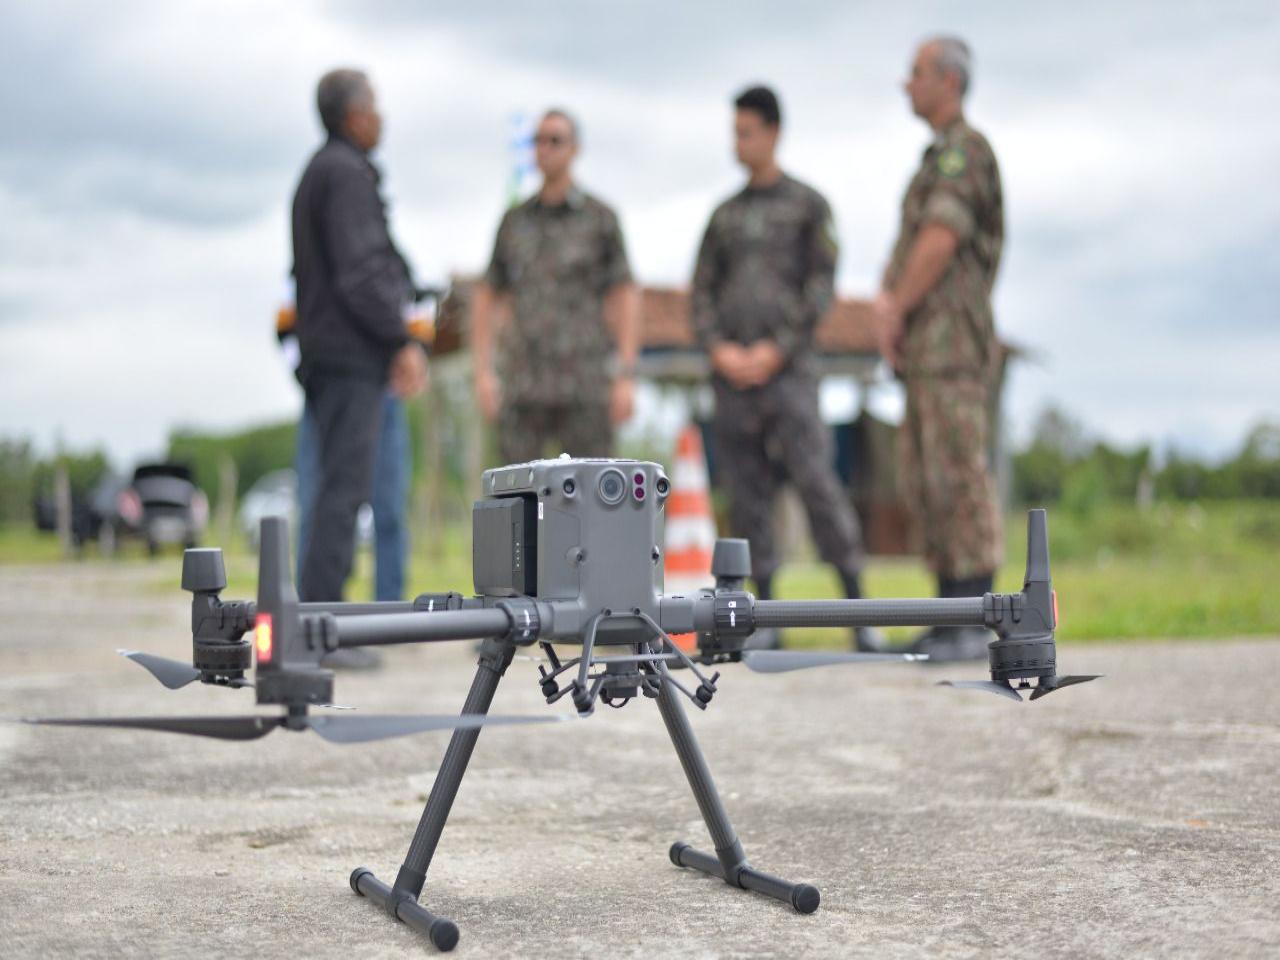 Brazilian Army Aviation increases combat and defense capabilities with new drones